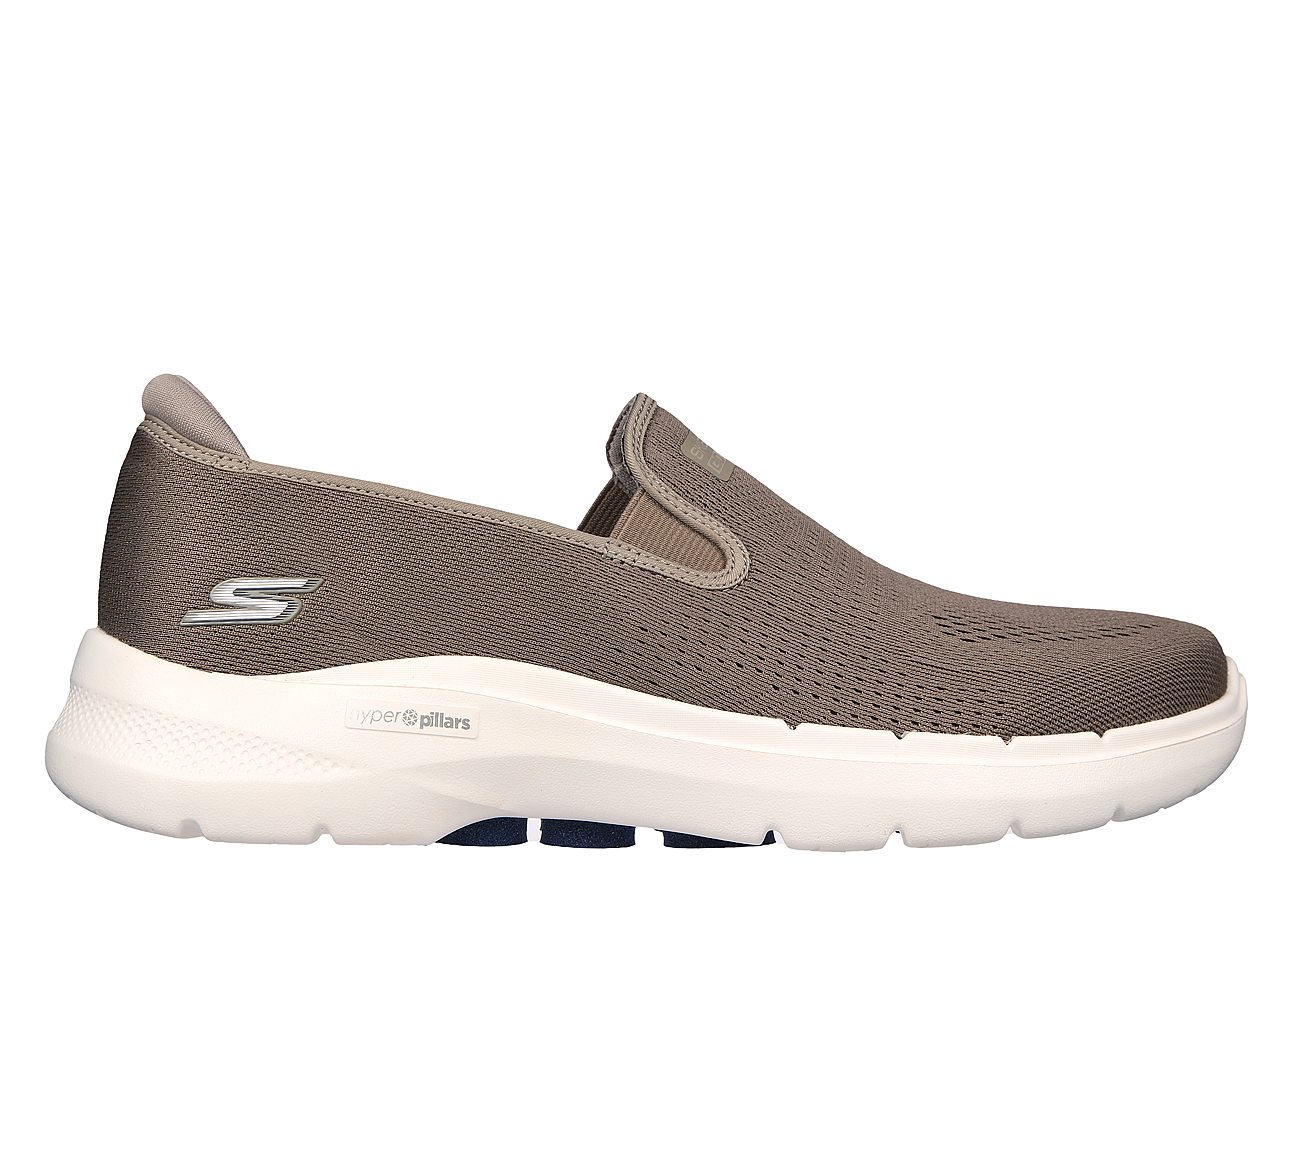 GO WALK 6, TAUPE/NAVY Footwear Lateral View